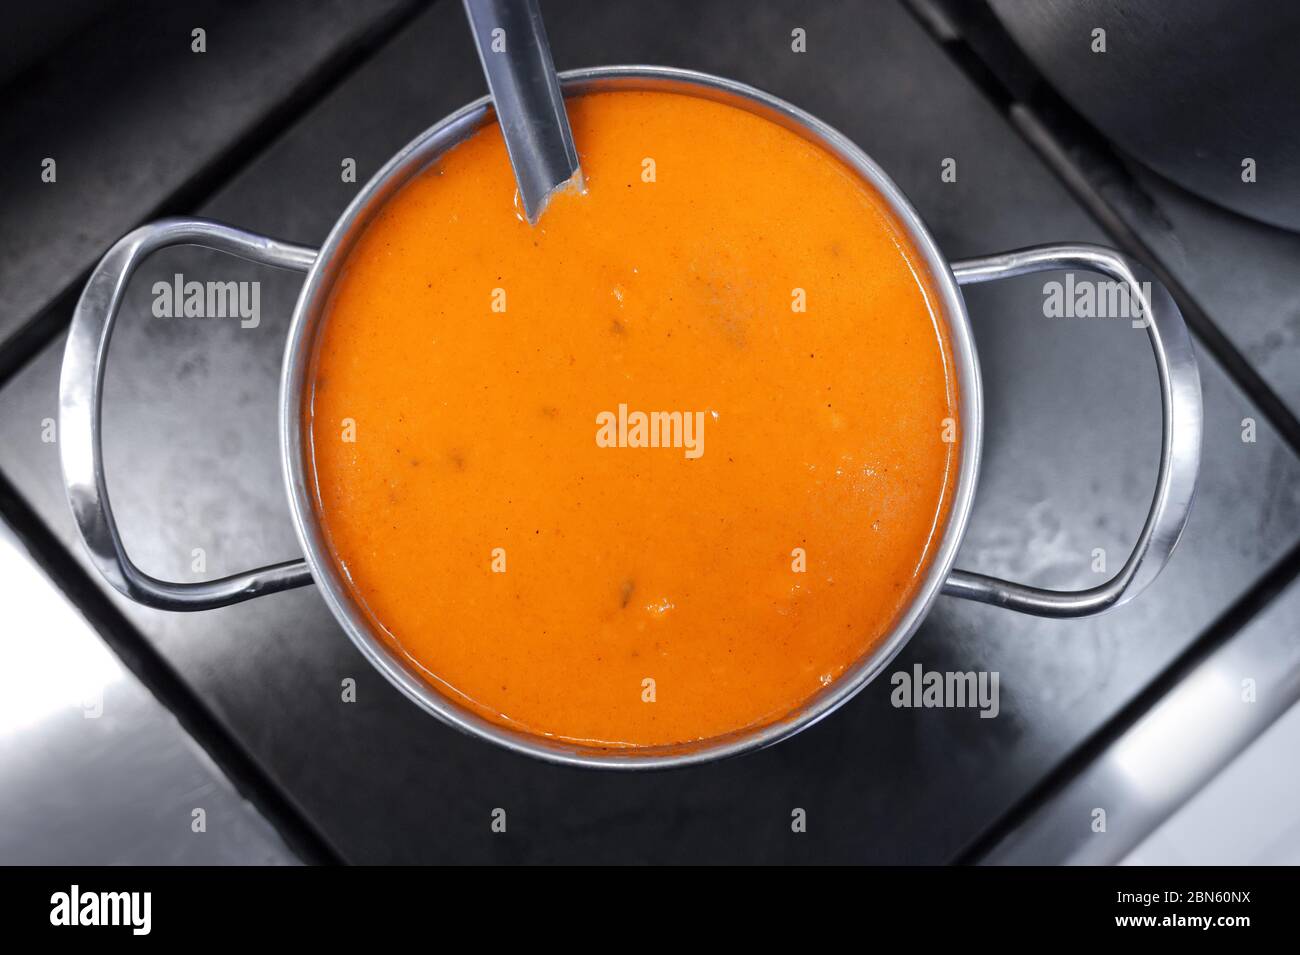 Yellow thick soup in a metal pot on the stove. Style and minimalism in the kitchen design. Stock Photo